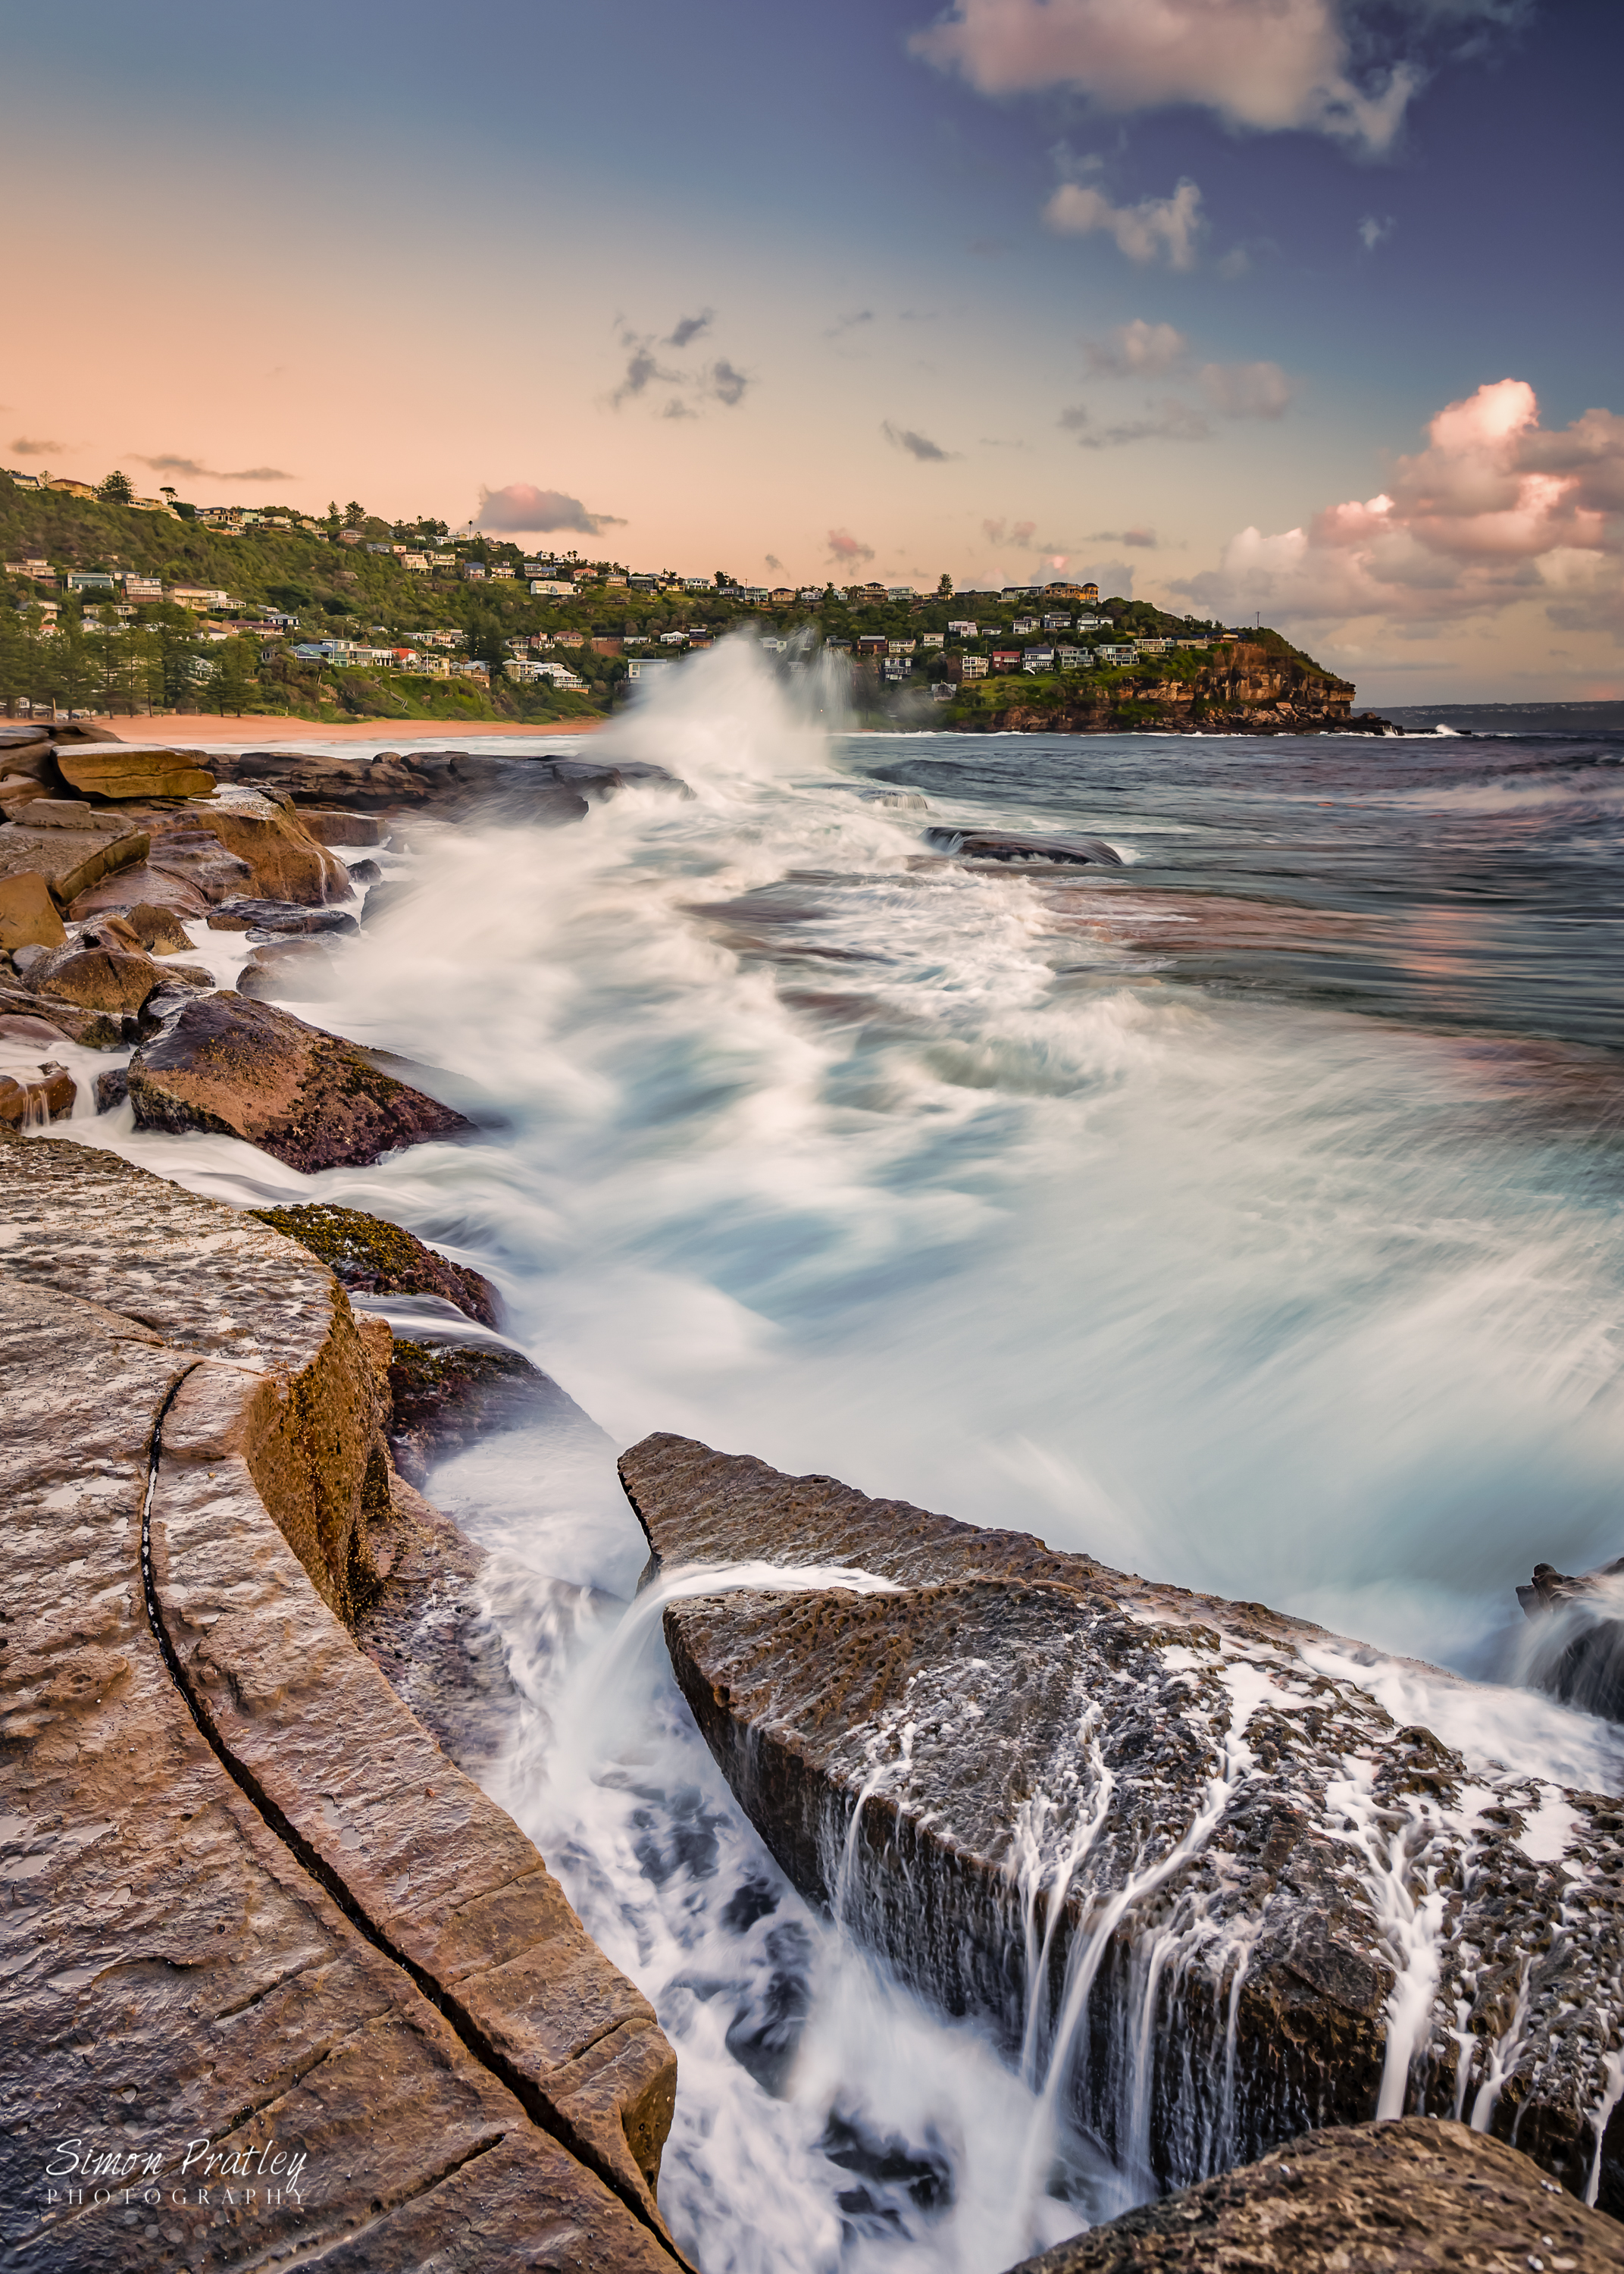 High Tide on the Rocks of Whale Beach